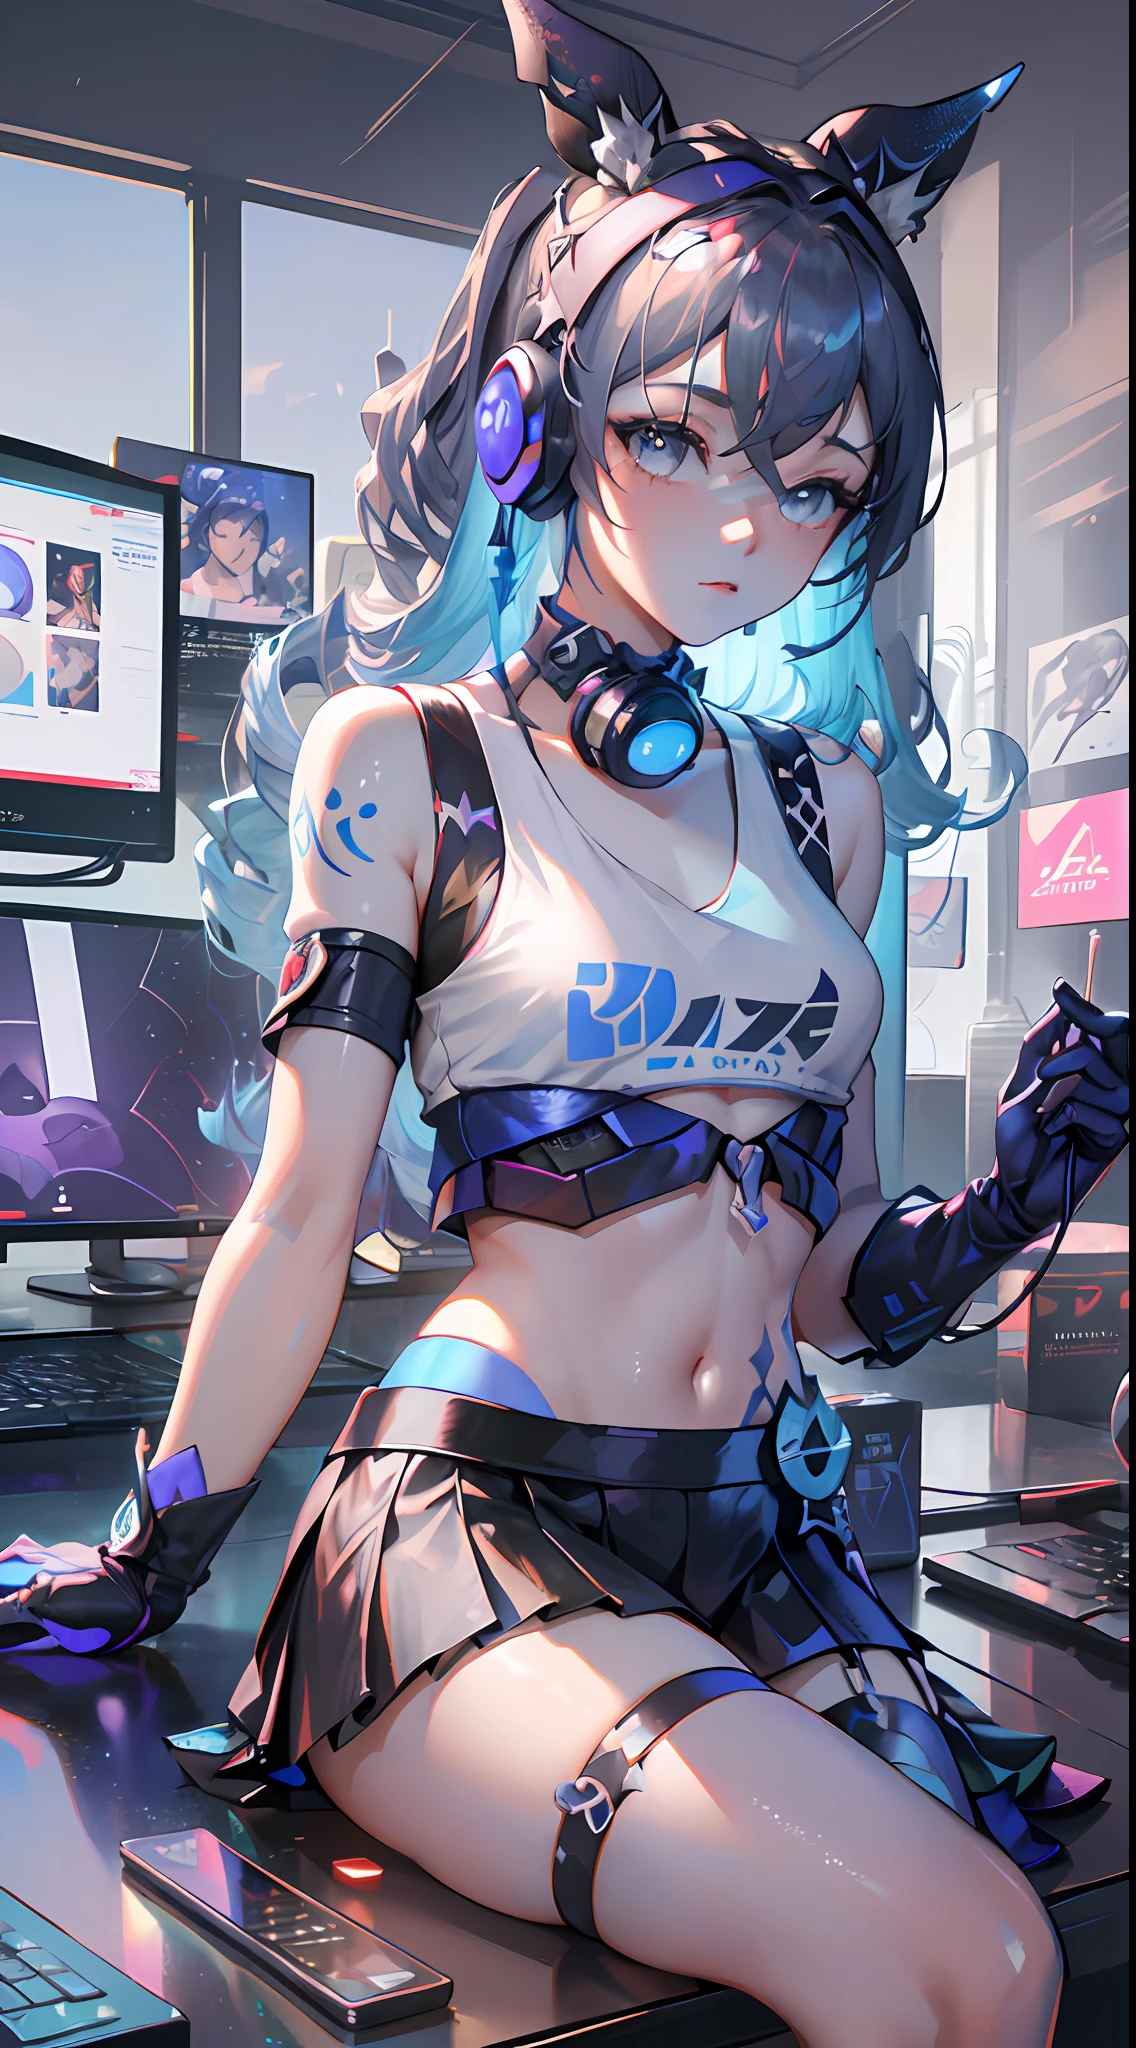 (((((7 avatar shot)))), Silver Wolf, Masterpiece, Best Quality, Ultra Detailed, Extremely Detailed 16k CG Wallpaper, Beautiful Face, (Silver Wolf in Esports Room), (Perfect Beautiful Curved Figure), Seated, Rainbow Color Jewel Eyes, Wearing Resin Hologram Sports Bra, Crop Top Drape, Mini Pleated Skirt, Bell Collar, Logo, Impotence, Contour Light, Concert, Neon Sign, Audio, Bell Collar, Esports Headset, Computer, Esports Room, Play Games, White Interior Through Red Skin, holographic projection, flat sphere, graffiti logo, highly detailed tattoo_,
Authoring information